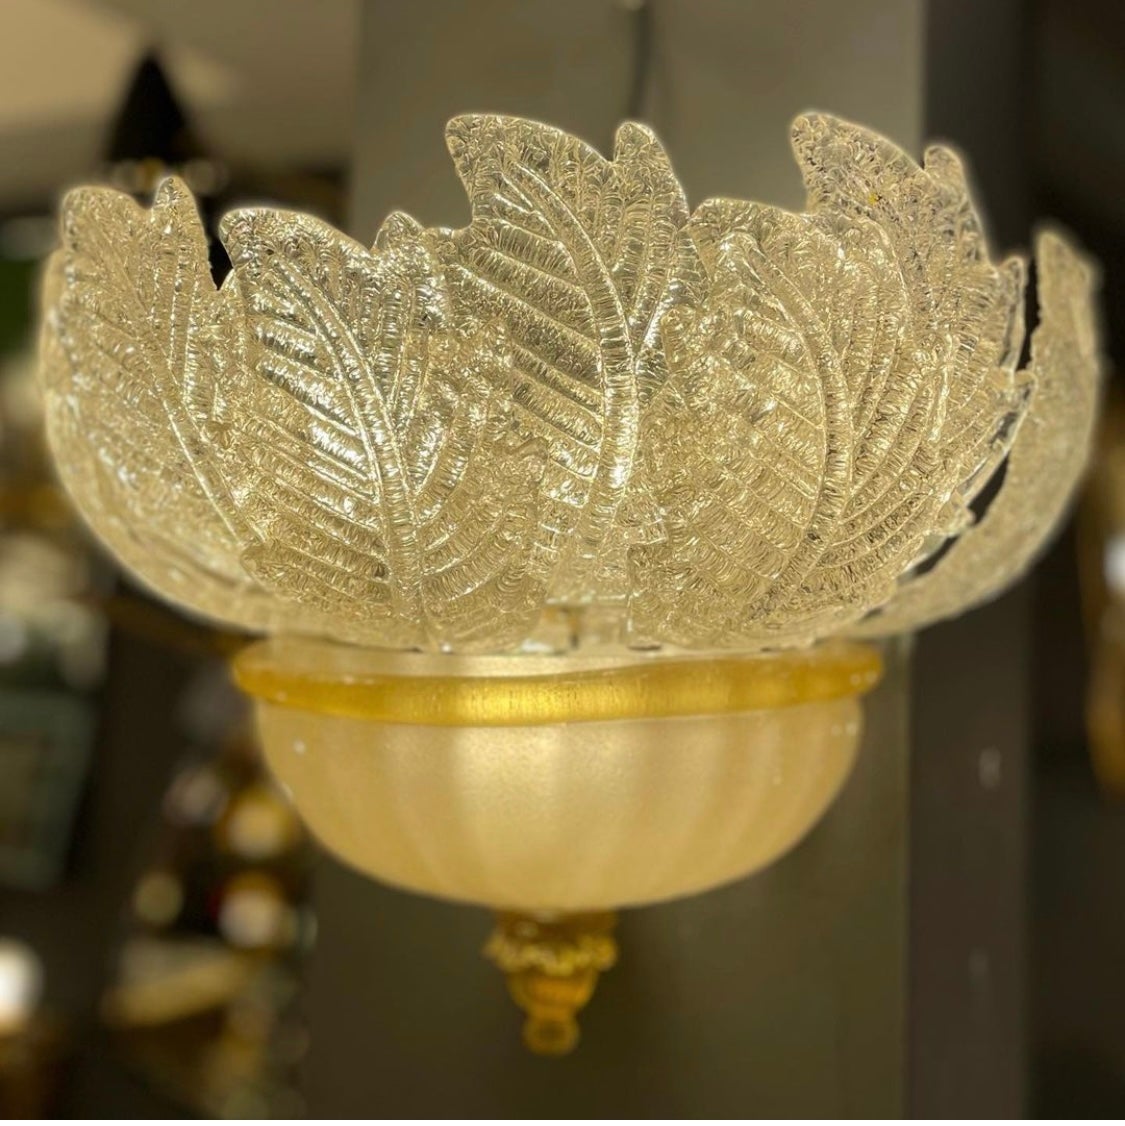 Stunning pair of Barovier and Toso Murano wall lights. Each wall light is made of 9 mouth-blown hand-formed leaf-form golden powder glass panels plus a huge glass as a bottom. This beauty has the look of a precious big flower. All glass parts are in